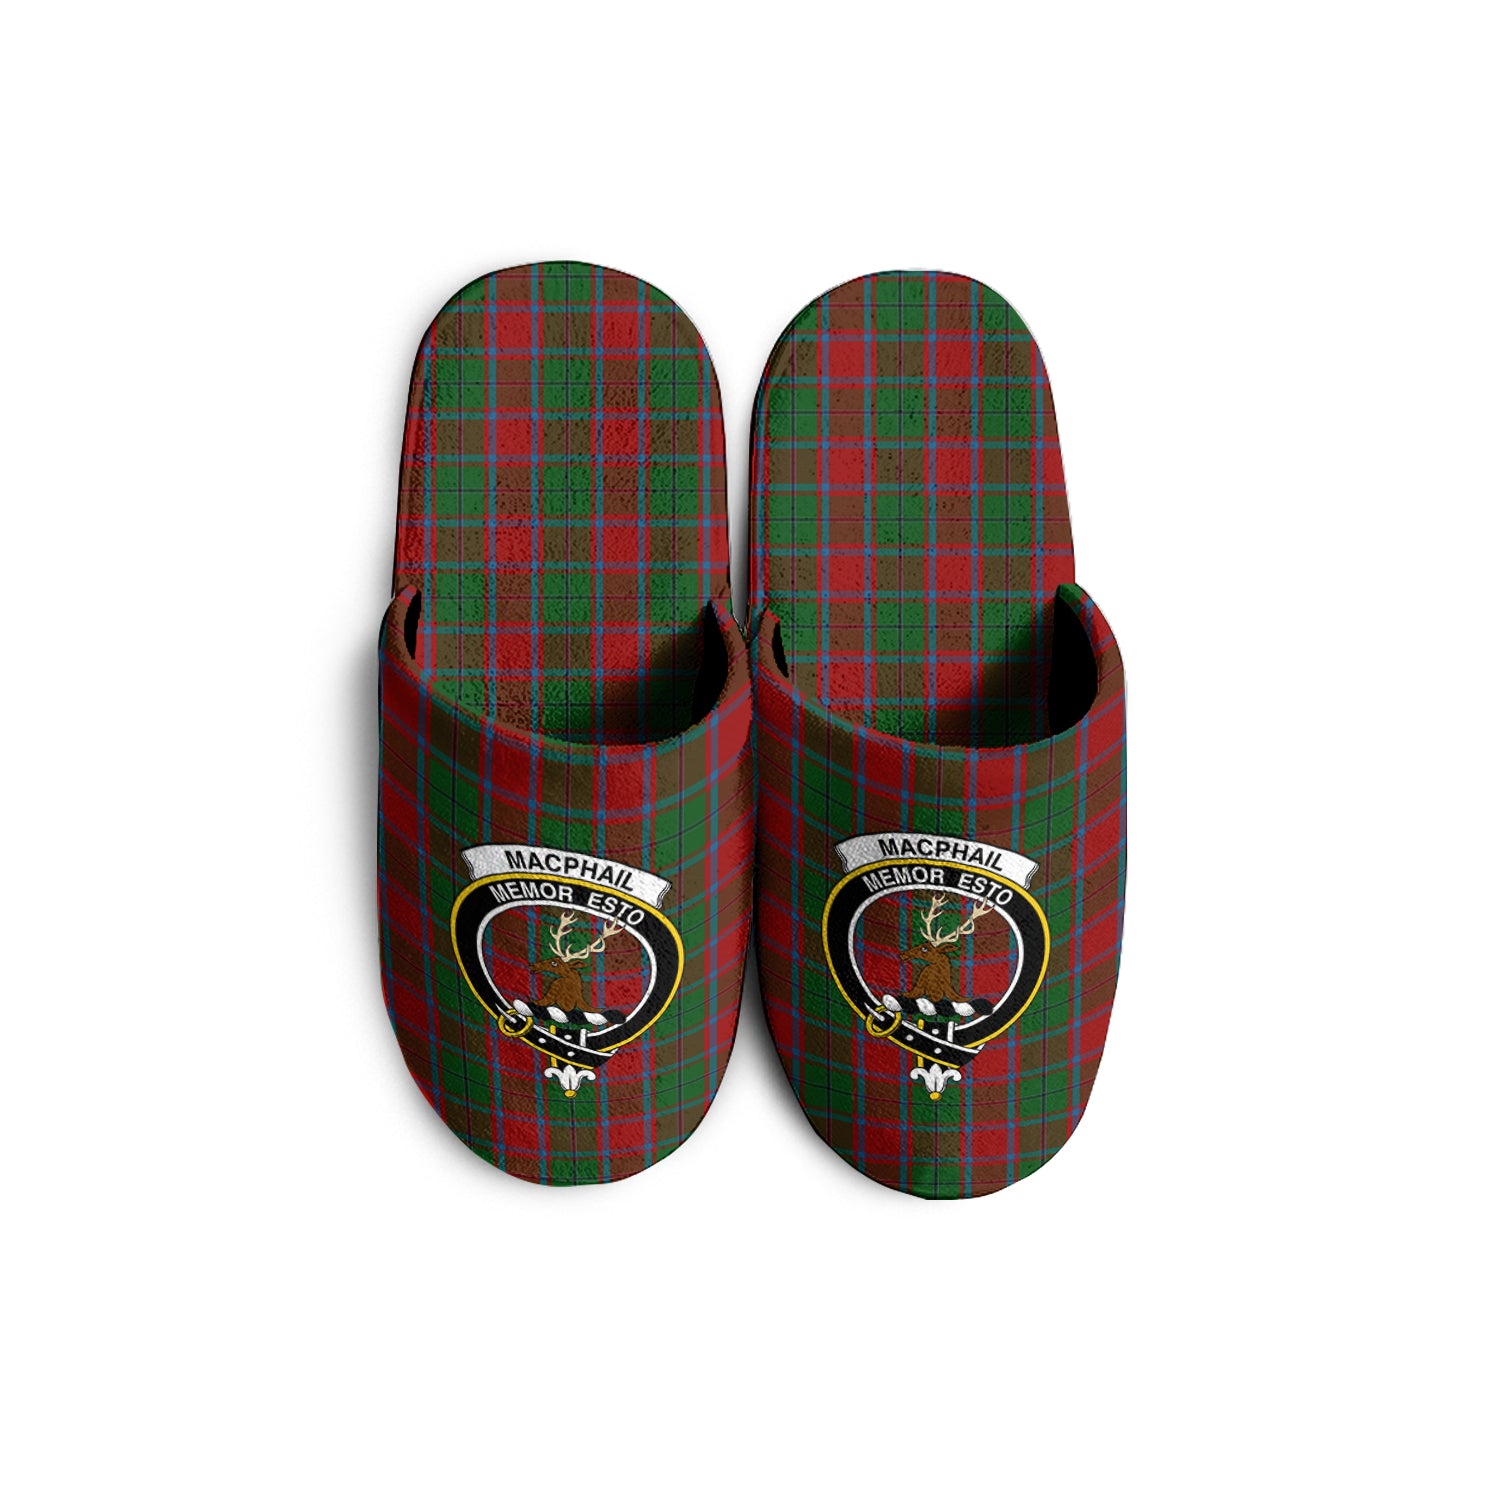 macphail-blue-bands-tartan-crest-slippers-famiy-crest-plaid-slippers